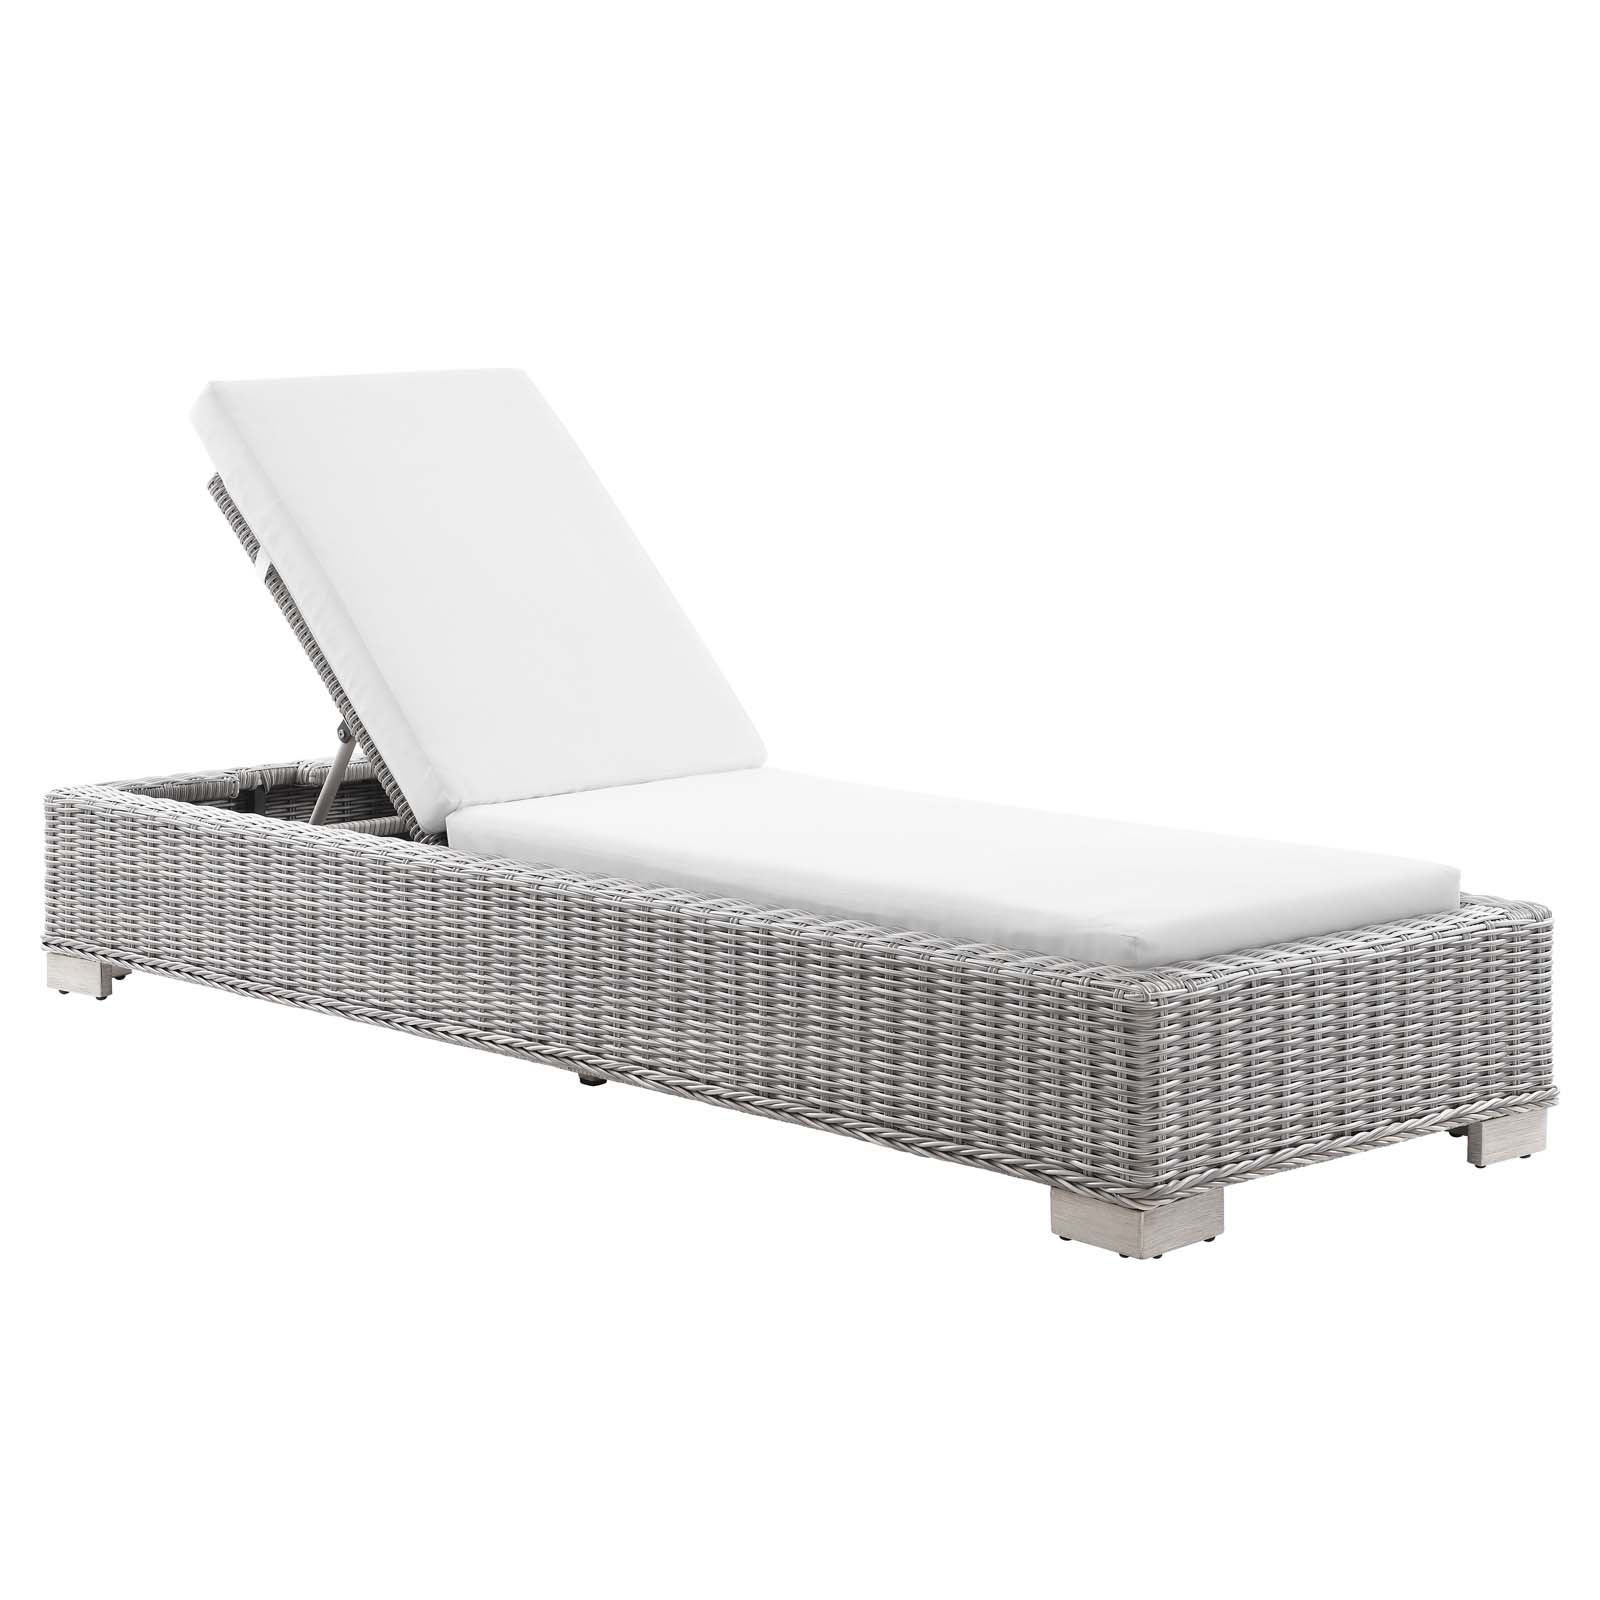 Modway Conway Outdoor Patio Wicker Rattan Chaise Lounge in Light Gray White - image 2 of 9